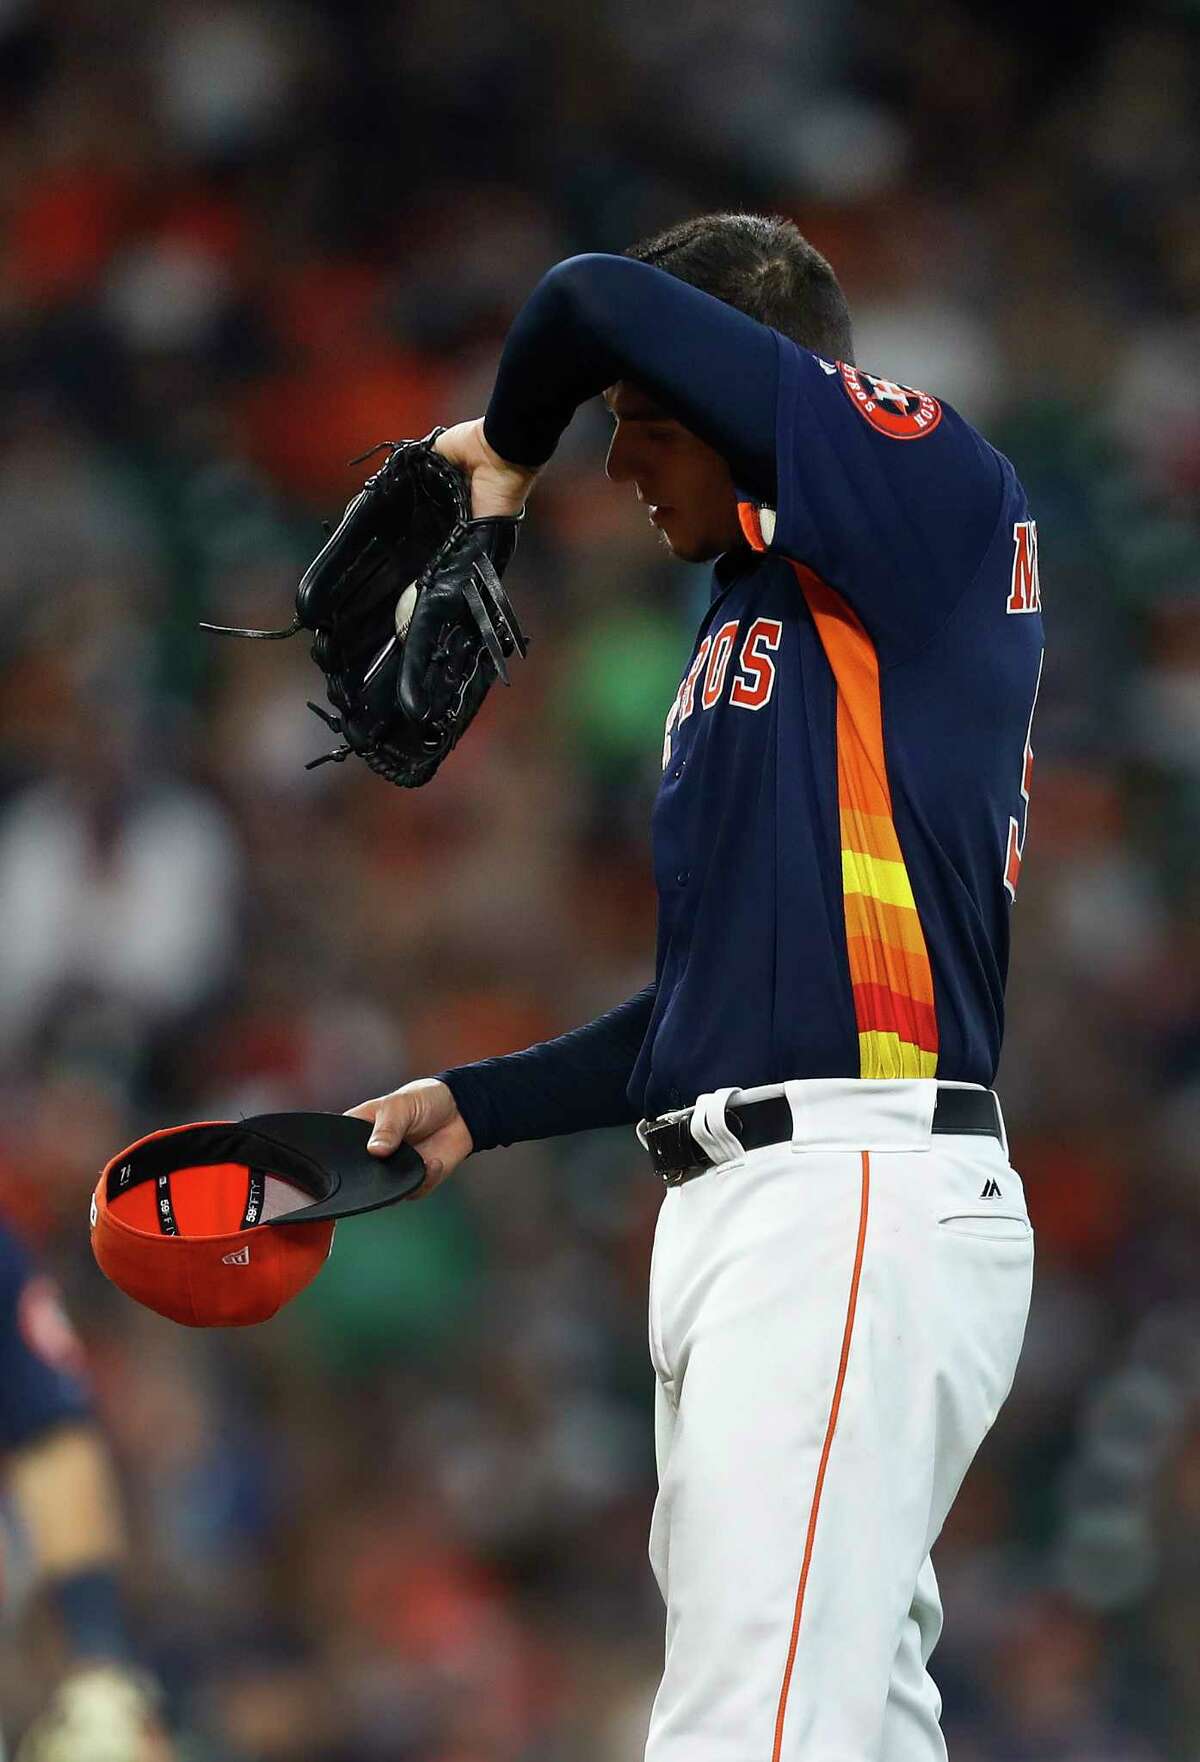 Houston Astros starting pitcher Joe Musgrove (59) wipes his brow as manager A.J. Hinch walked out to the mound to retrieve him during the fourth inning of an MLB baseball game at Minute Maid Park, Sunday, May 21, 2017.